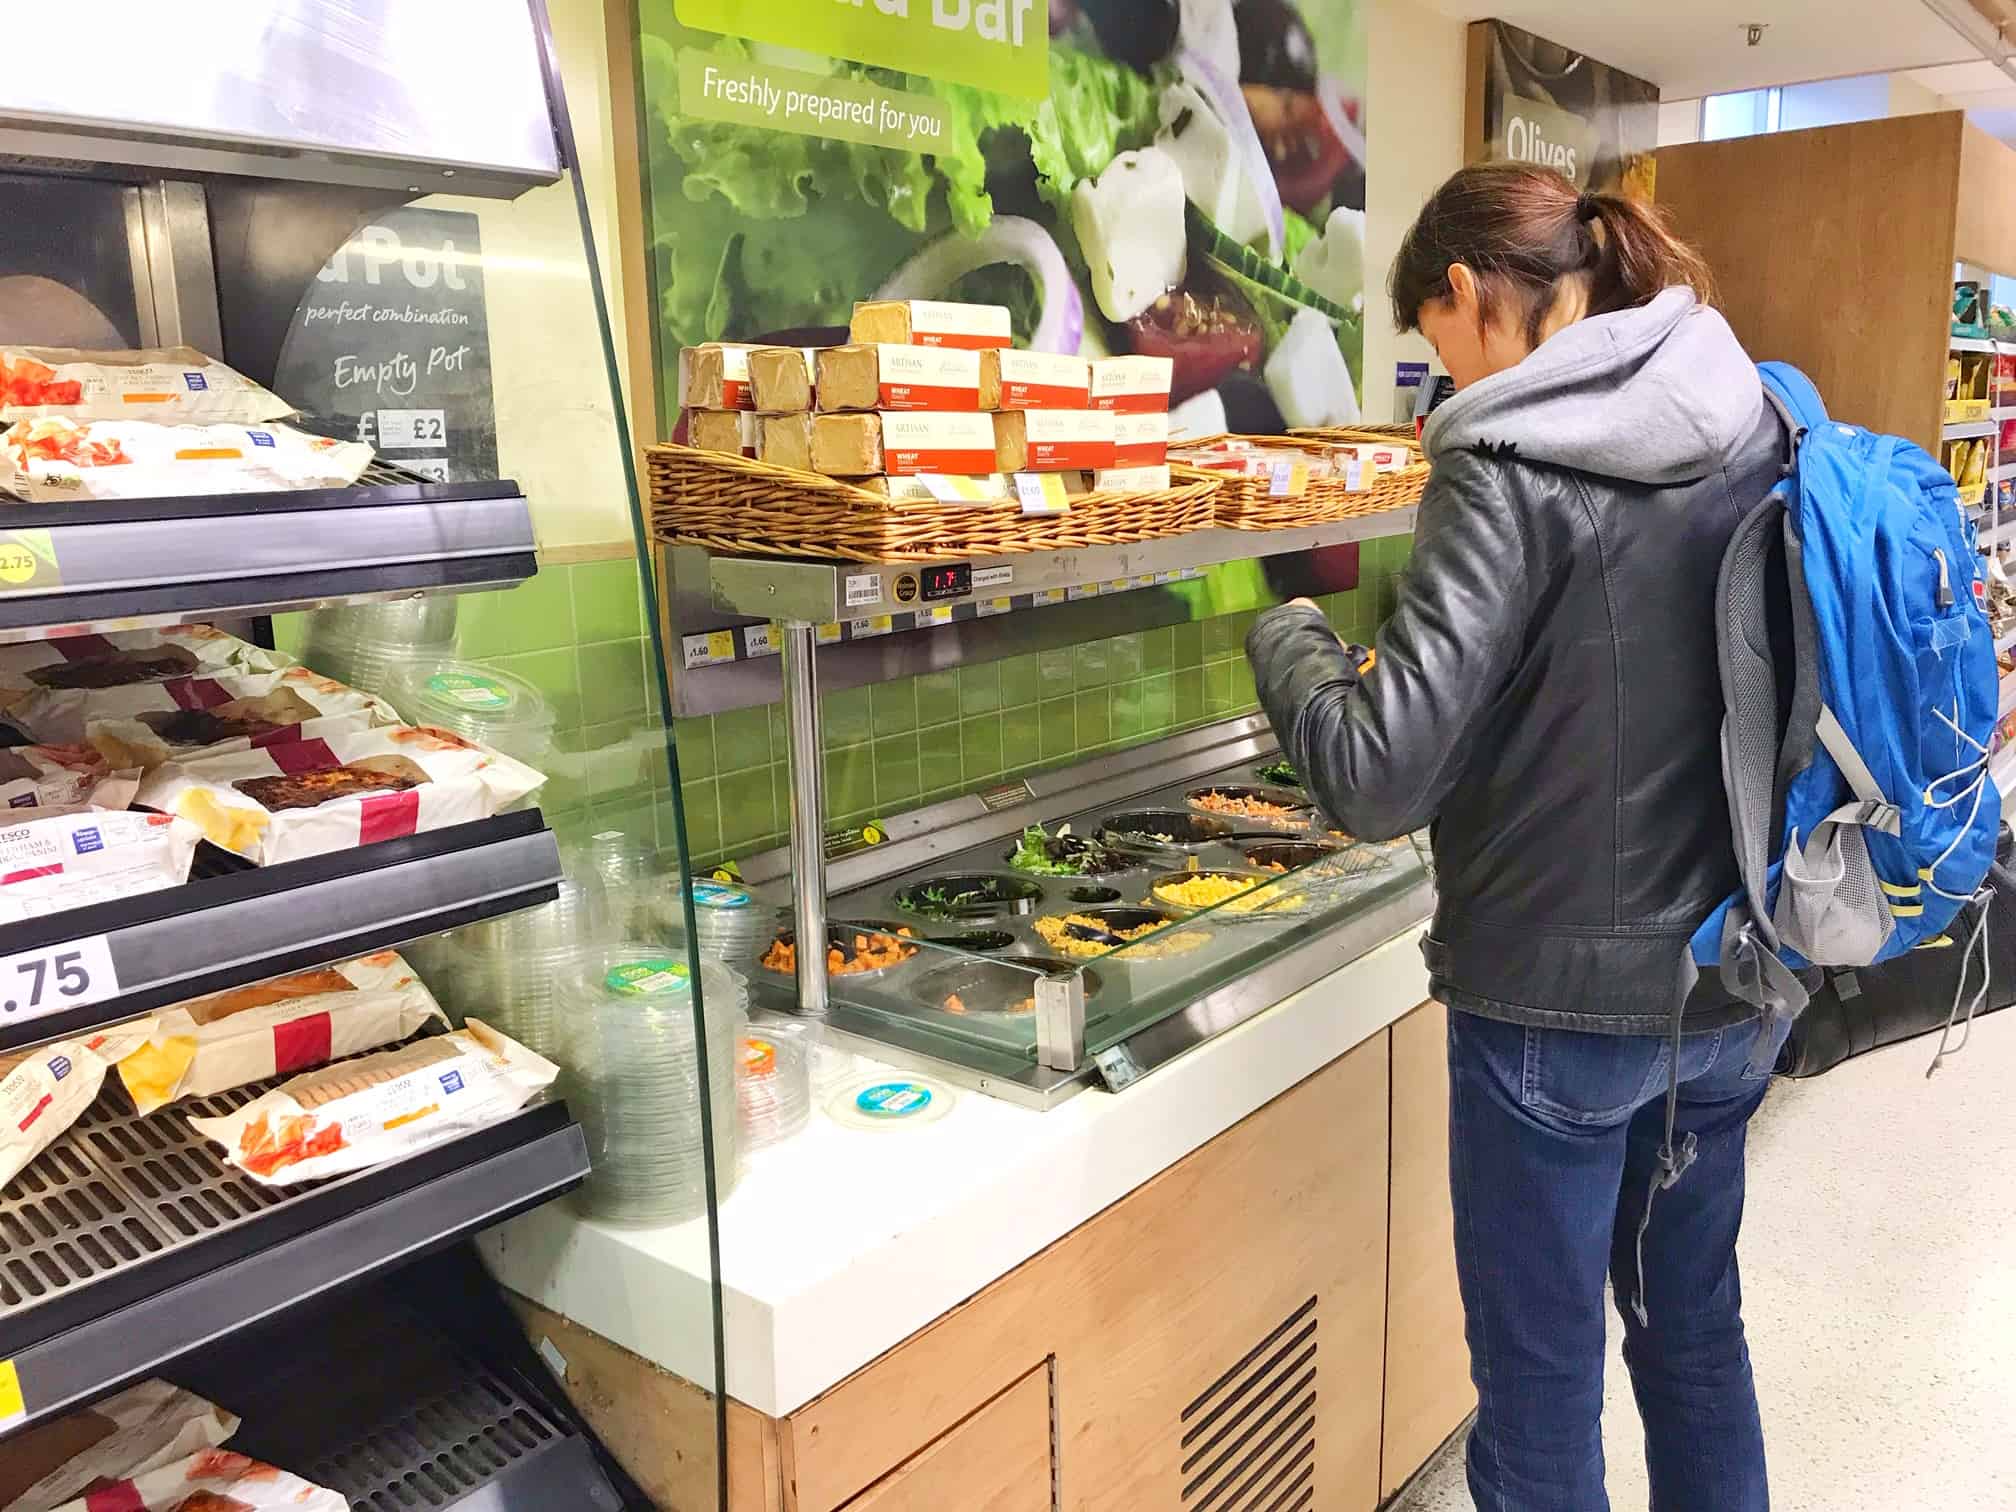 fresh salad bar at London grocery stores | supermarkets in london travel tips